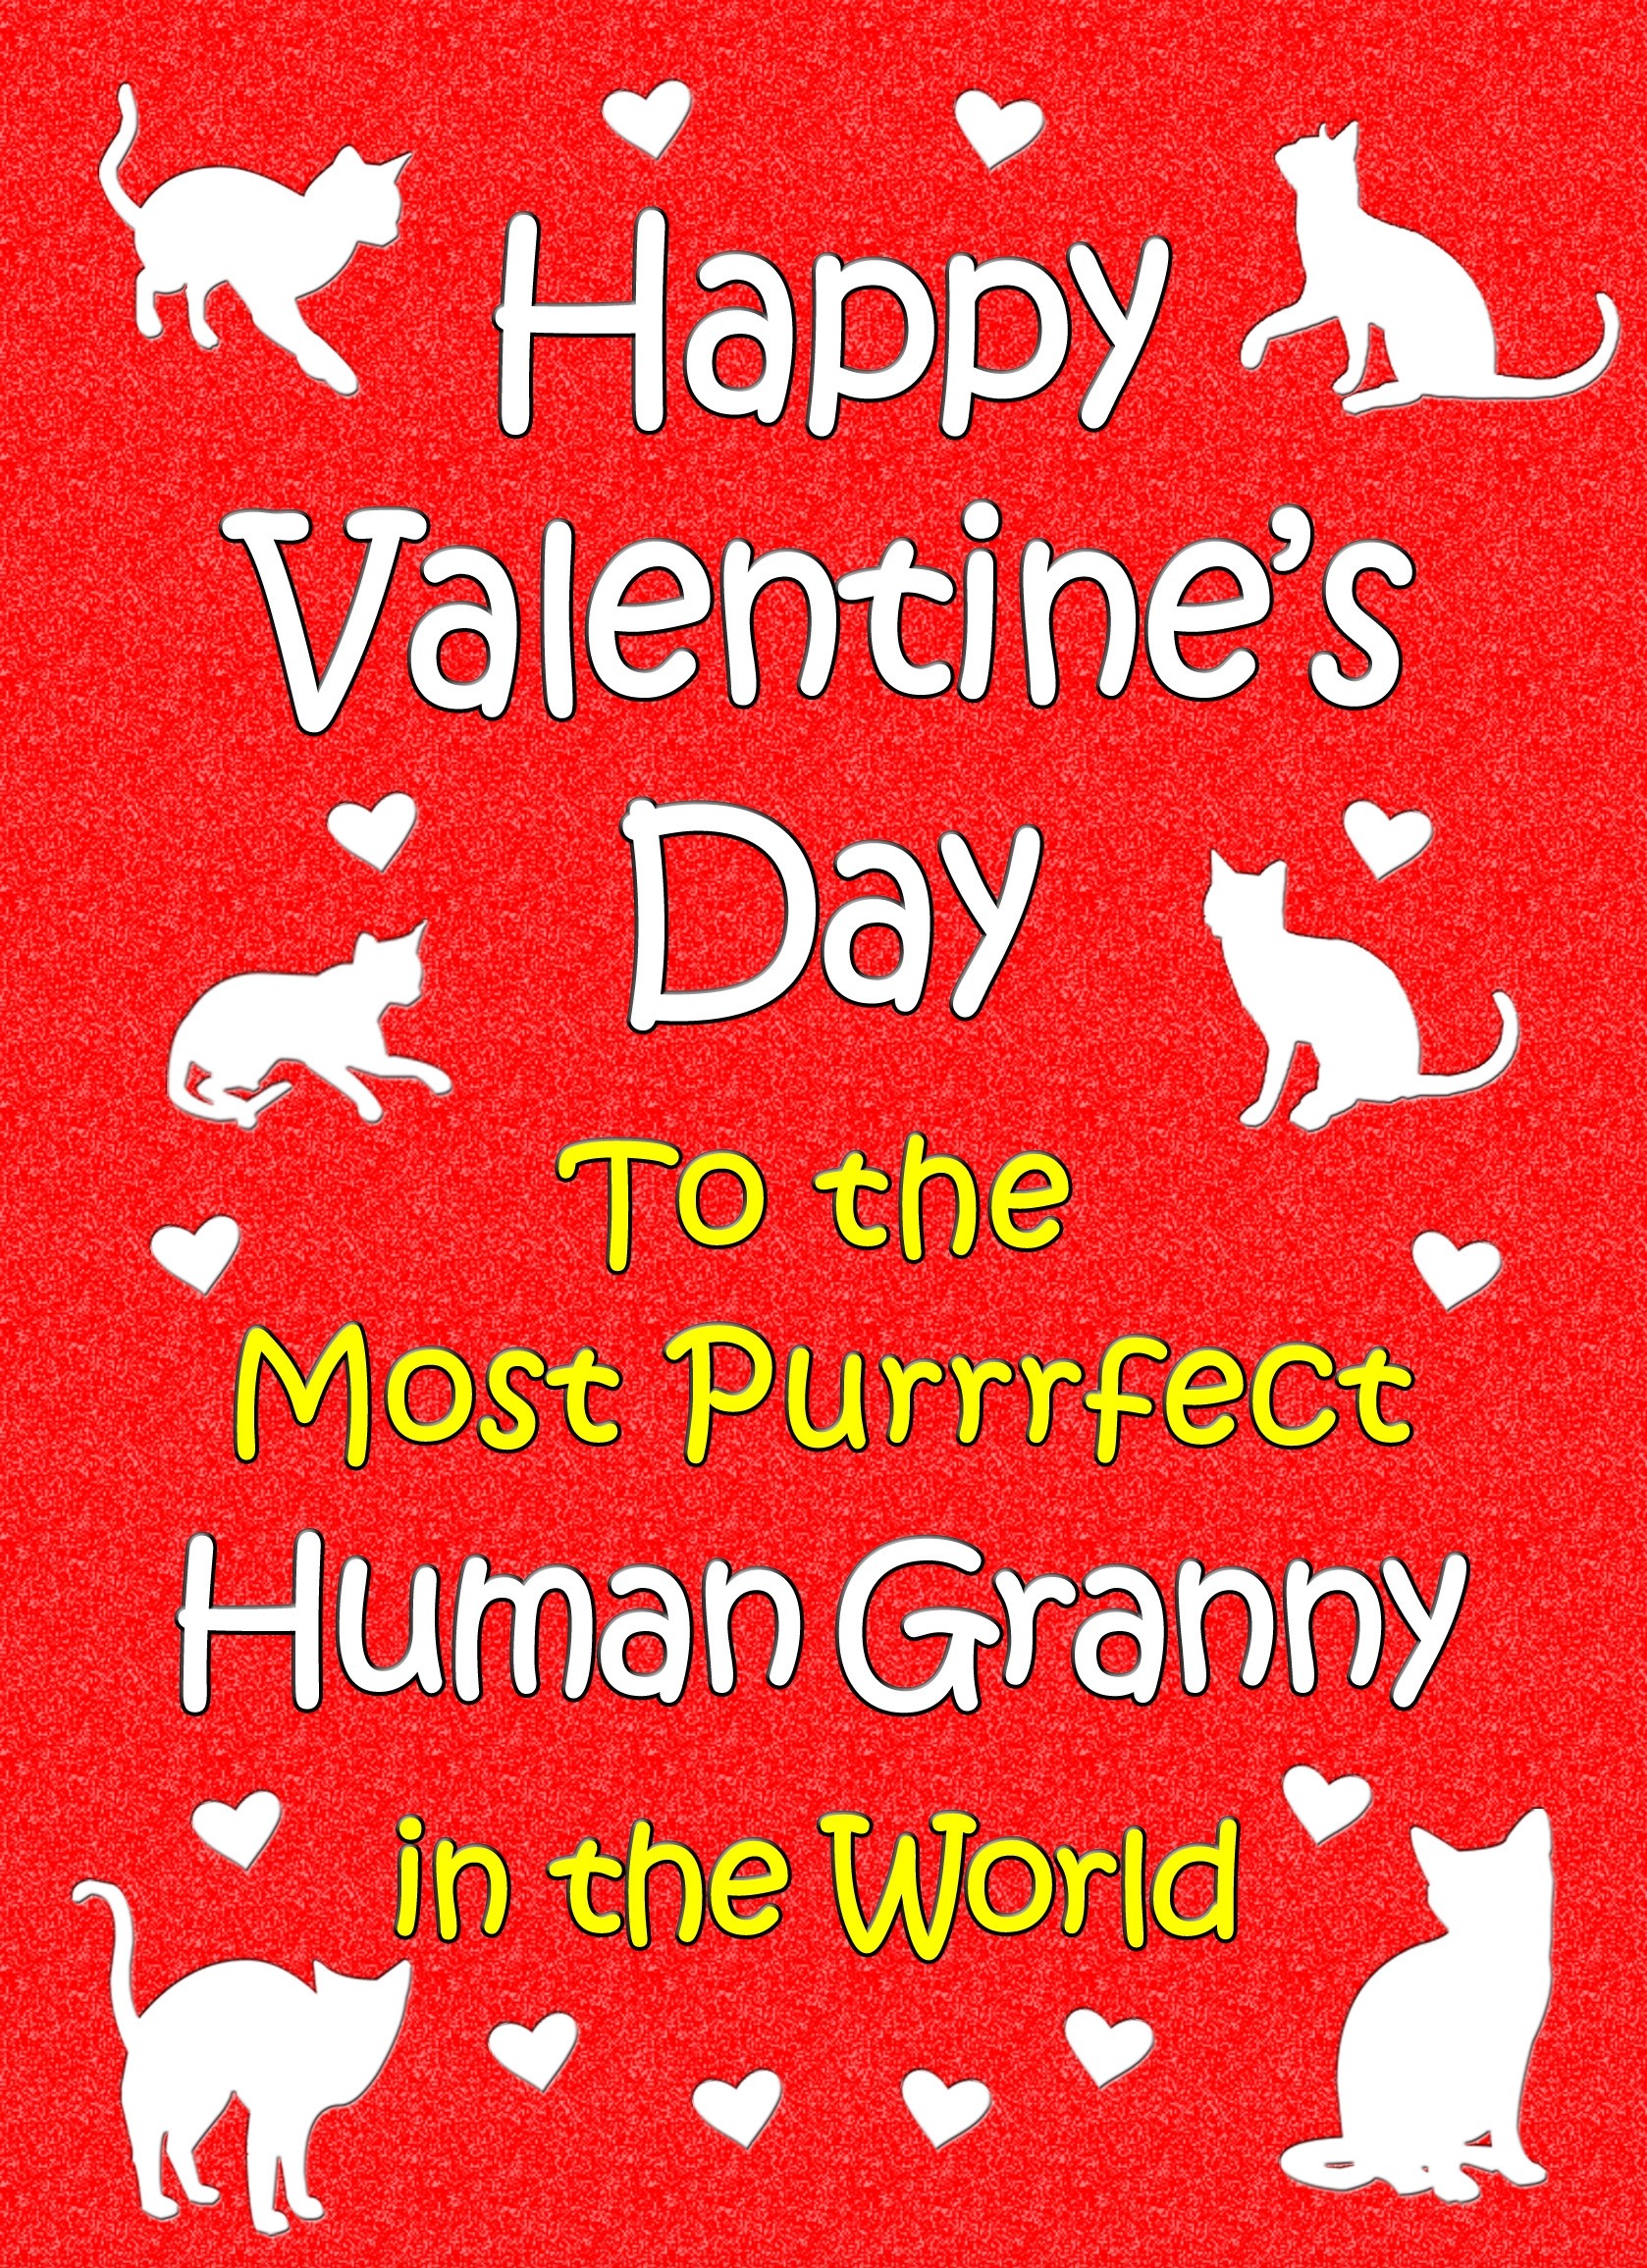 From The Cat Valentines Day Card (Human Granny)